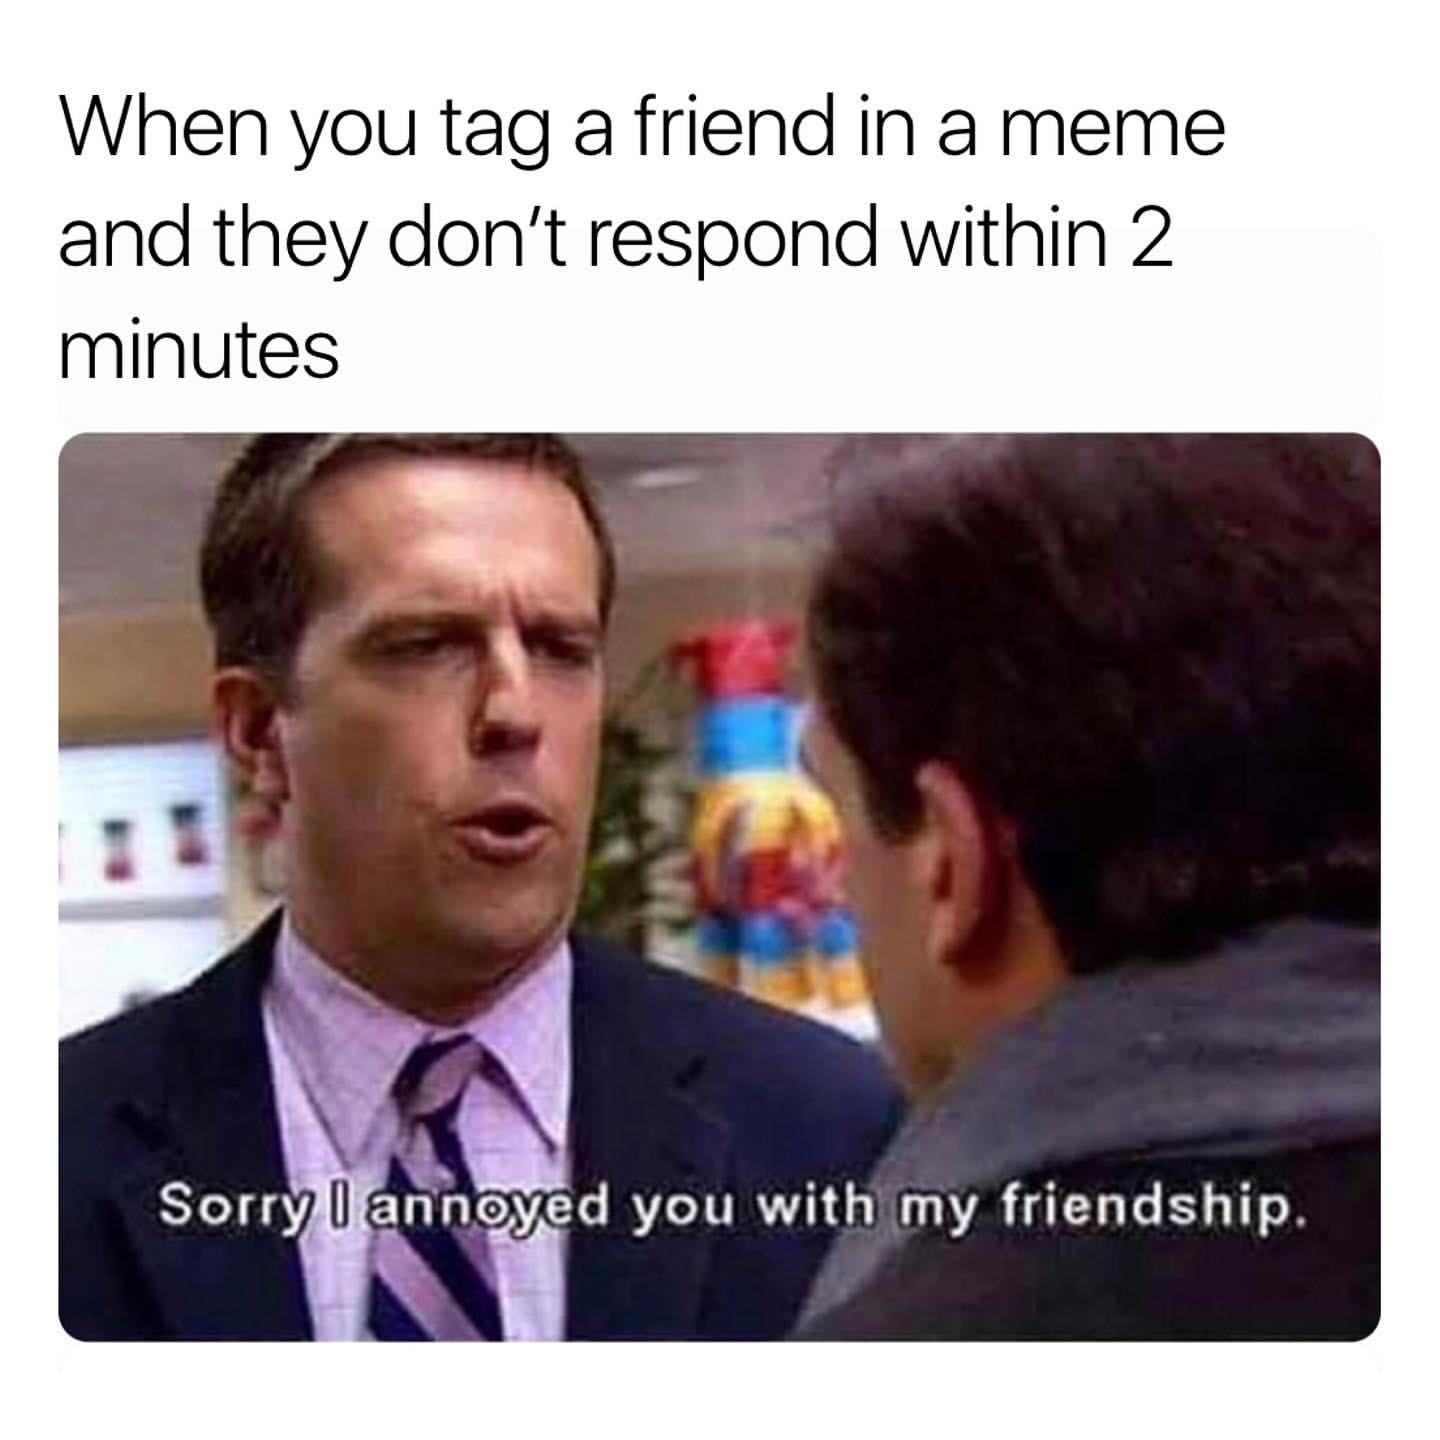 When you tag a friend in a meme and they don't respond within 2 minutes. Sorry I annoyed you with my friendship.